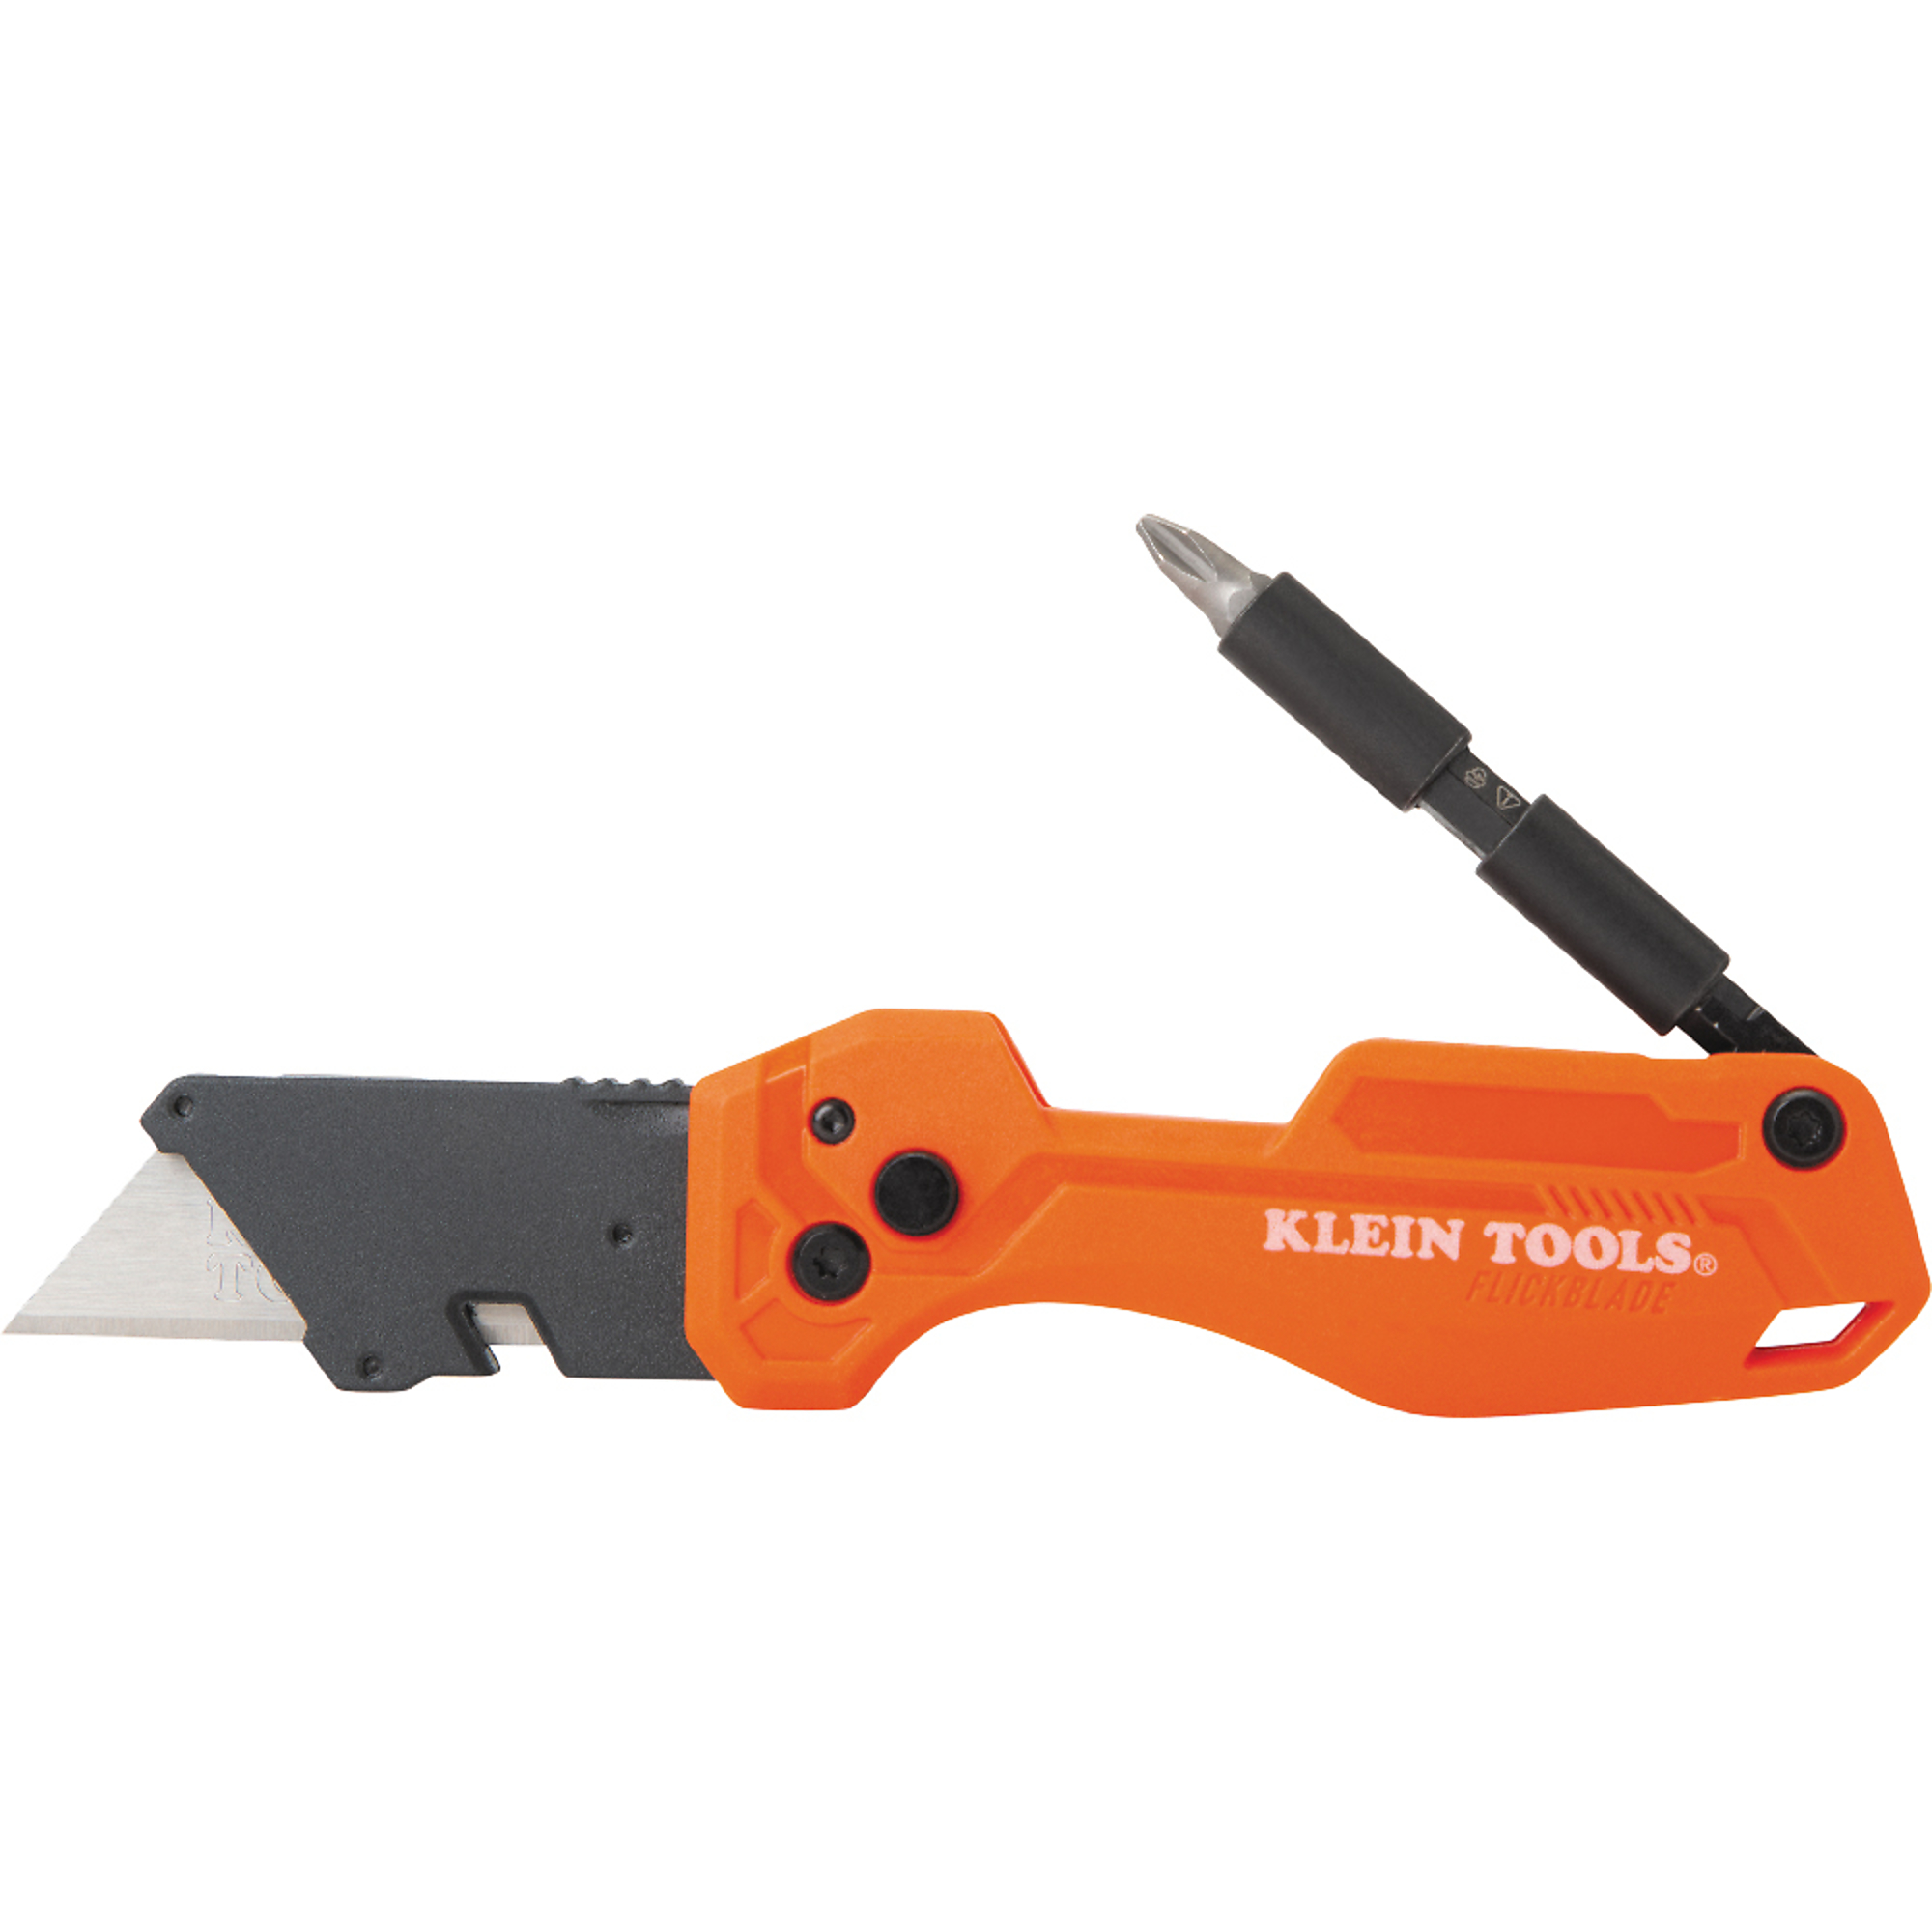 Klein Tools, Folding Utility Knife With Driver, Blades (qty.) 1 Knives (qty.) 1 Folding, Model 44304